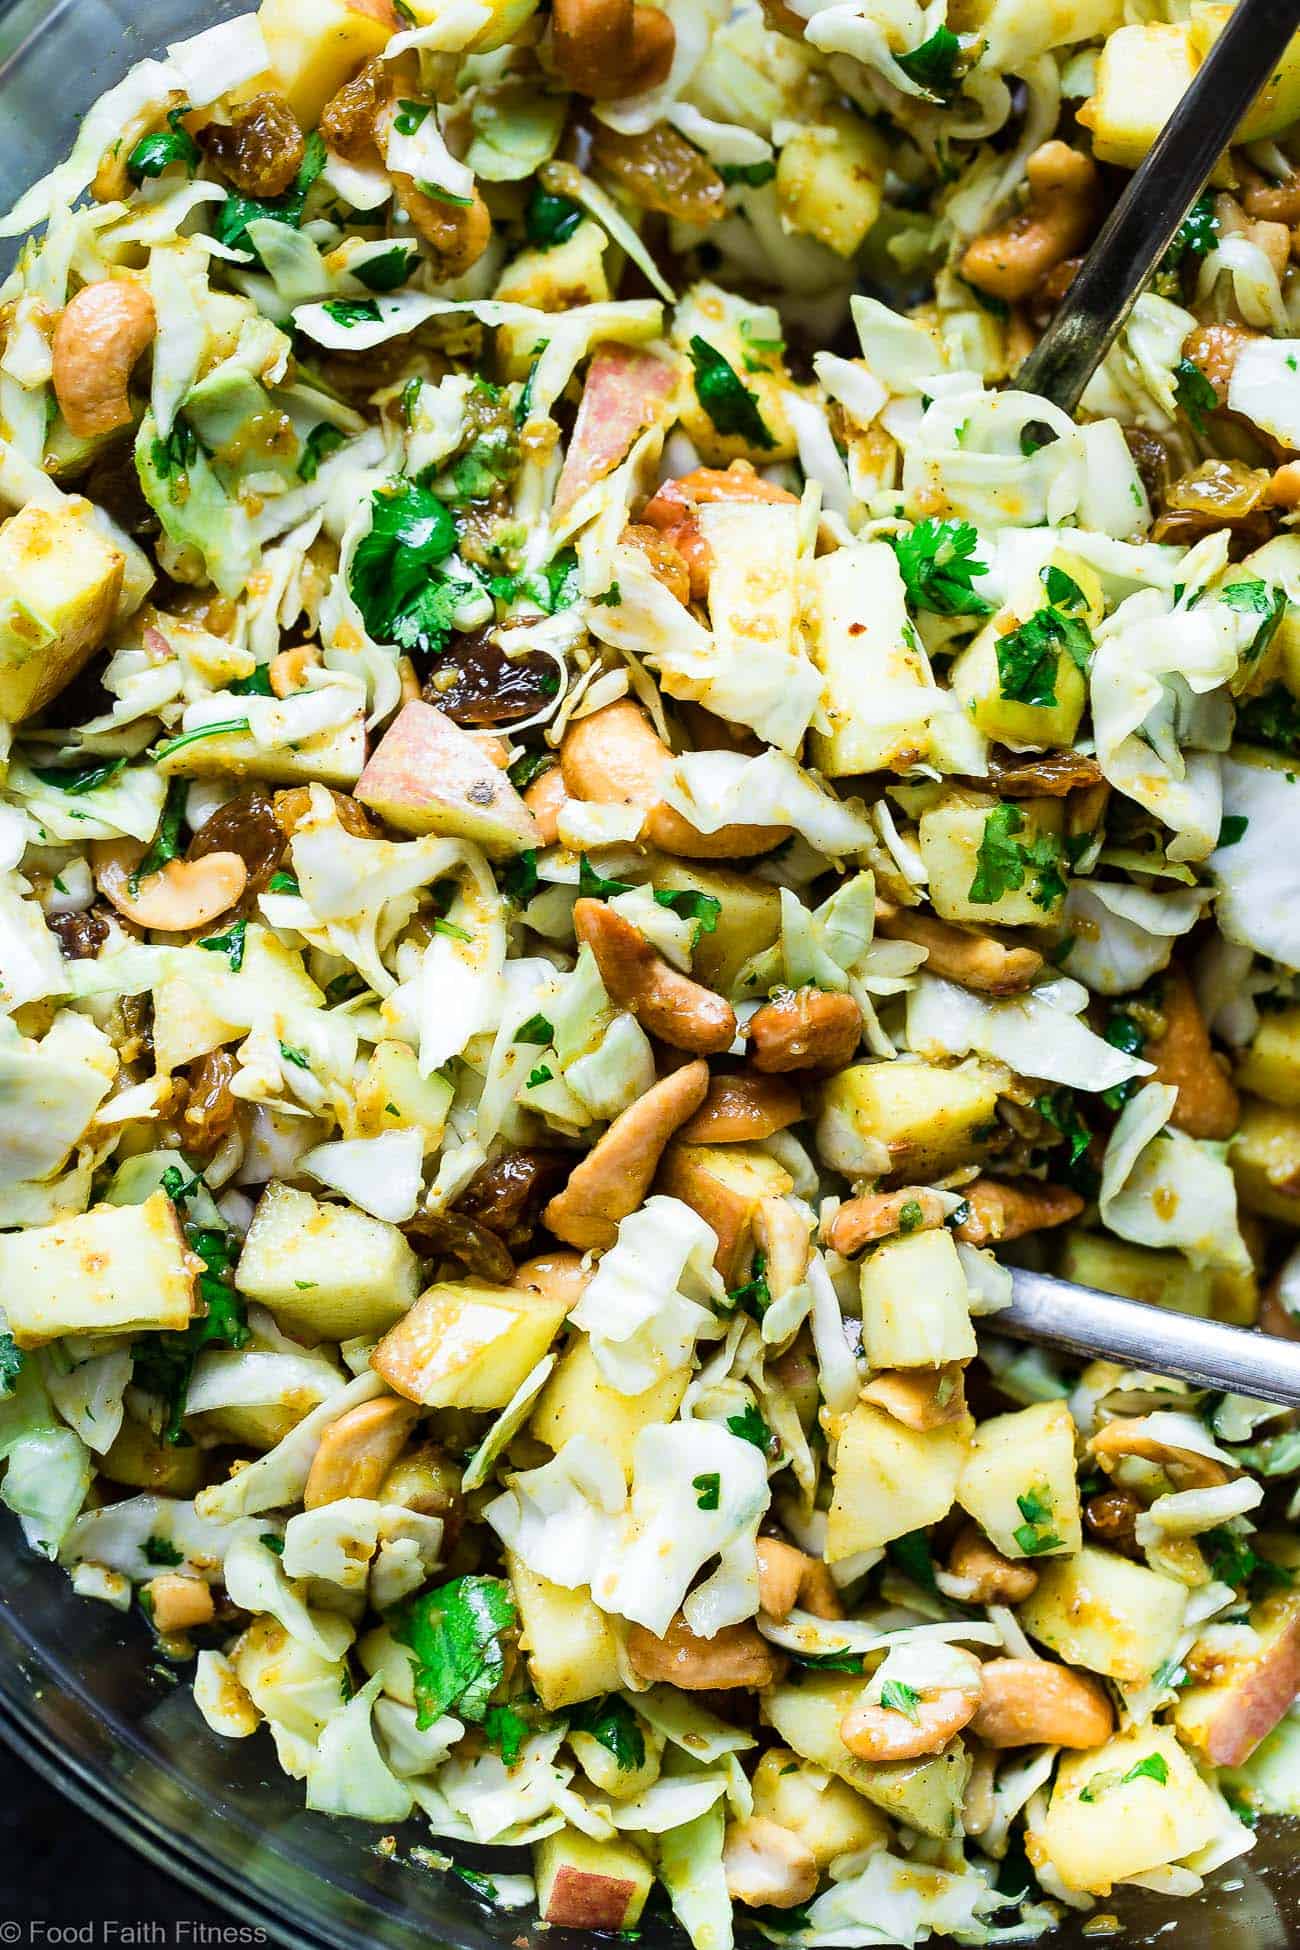 Curry Cashew Shredded Cabbage Salad with Apples - A sugar and gluten free healthy raw cabbage salad that is mixed with a creamy curry dressing and crunchy cashews! A healthy, paleo and whole30 side dish that everyone will love! | Foodfaithfitness.com | @FoodFaithFit